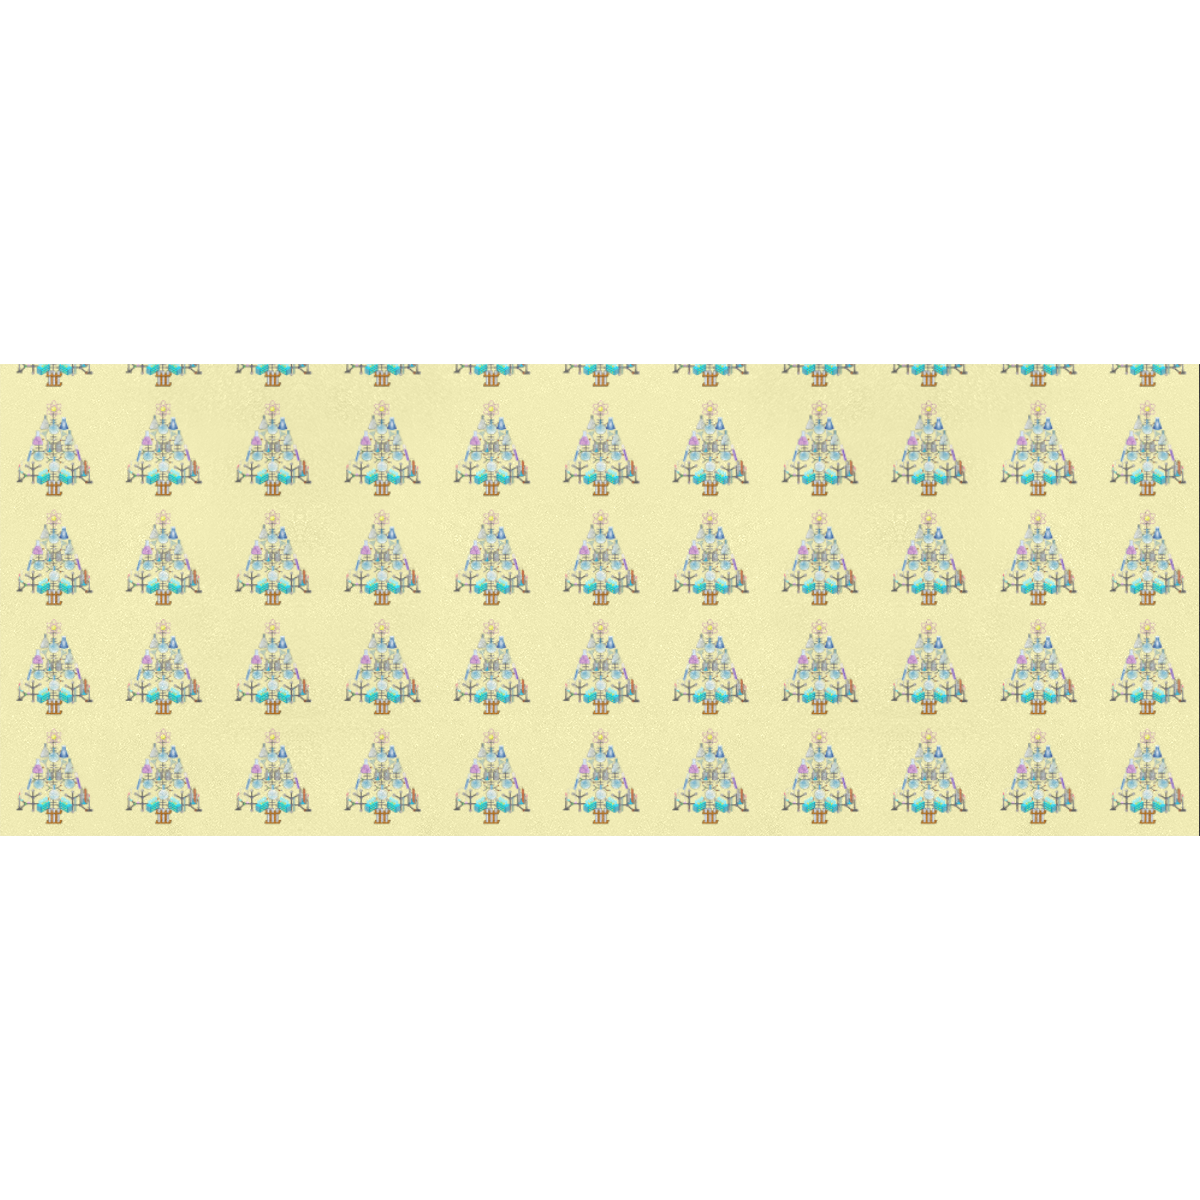 Oh Chemist Tree, Oh Chemistry, Science Christmas on Yellow Gift Wrapping Paper 58"x 23" (2 Rolls)